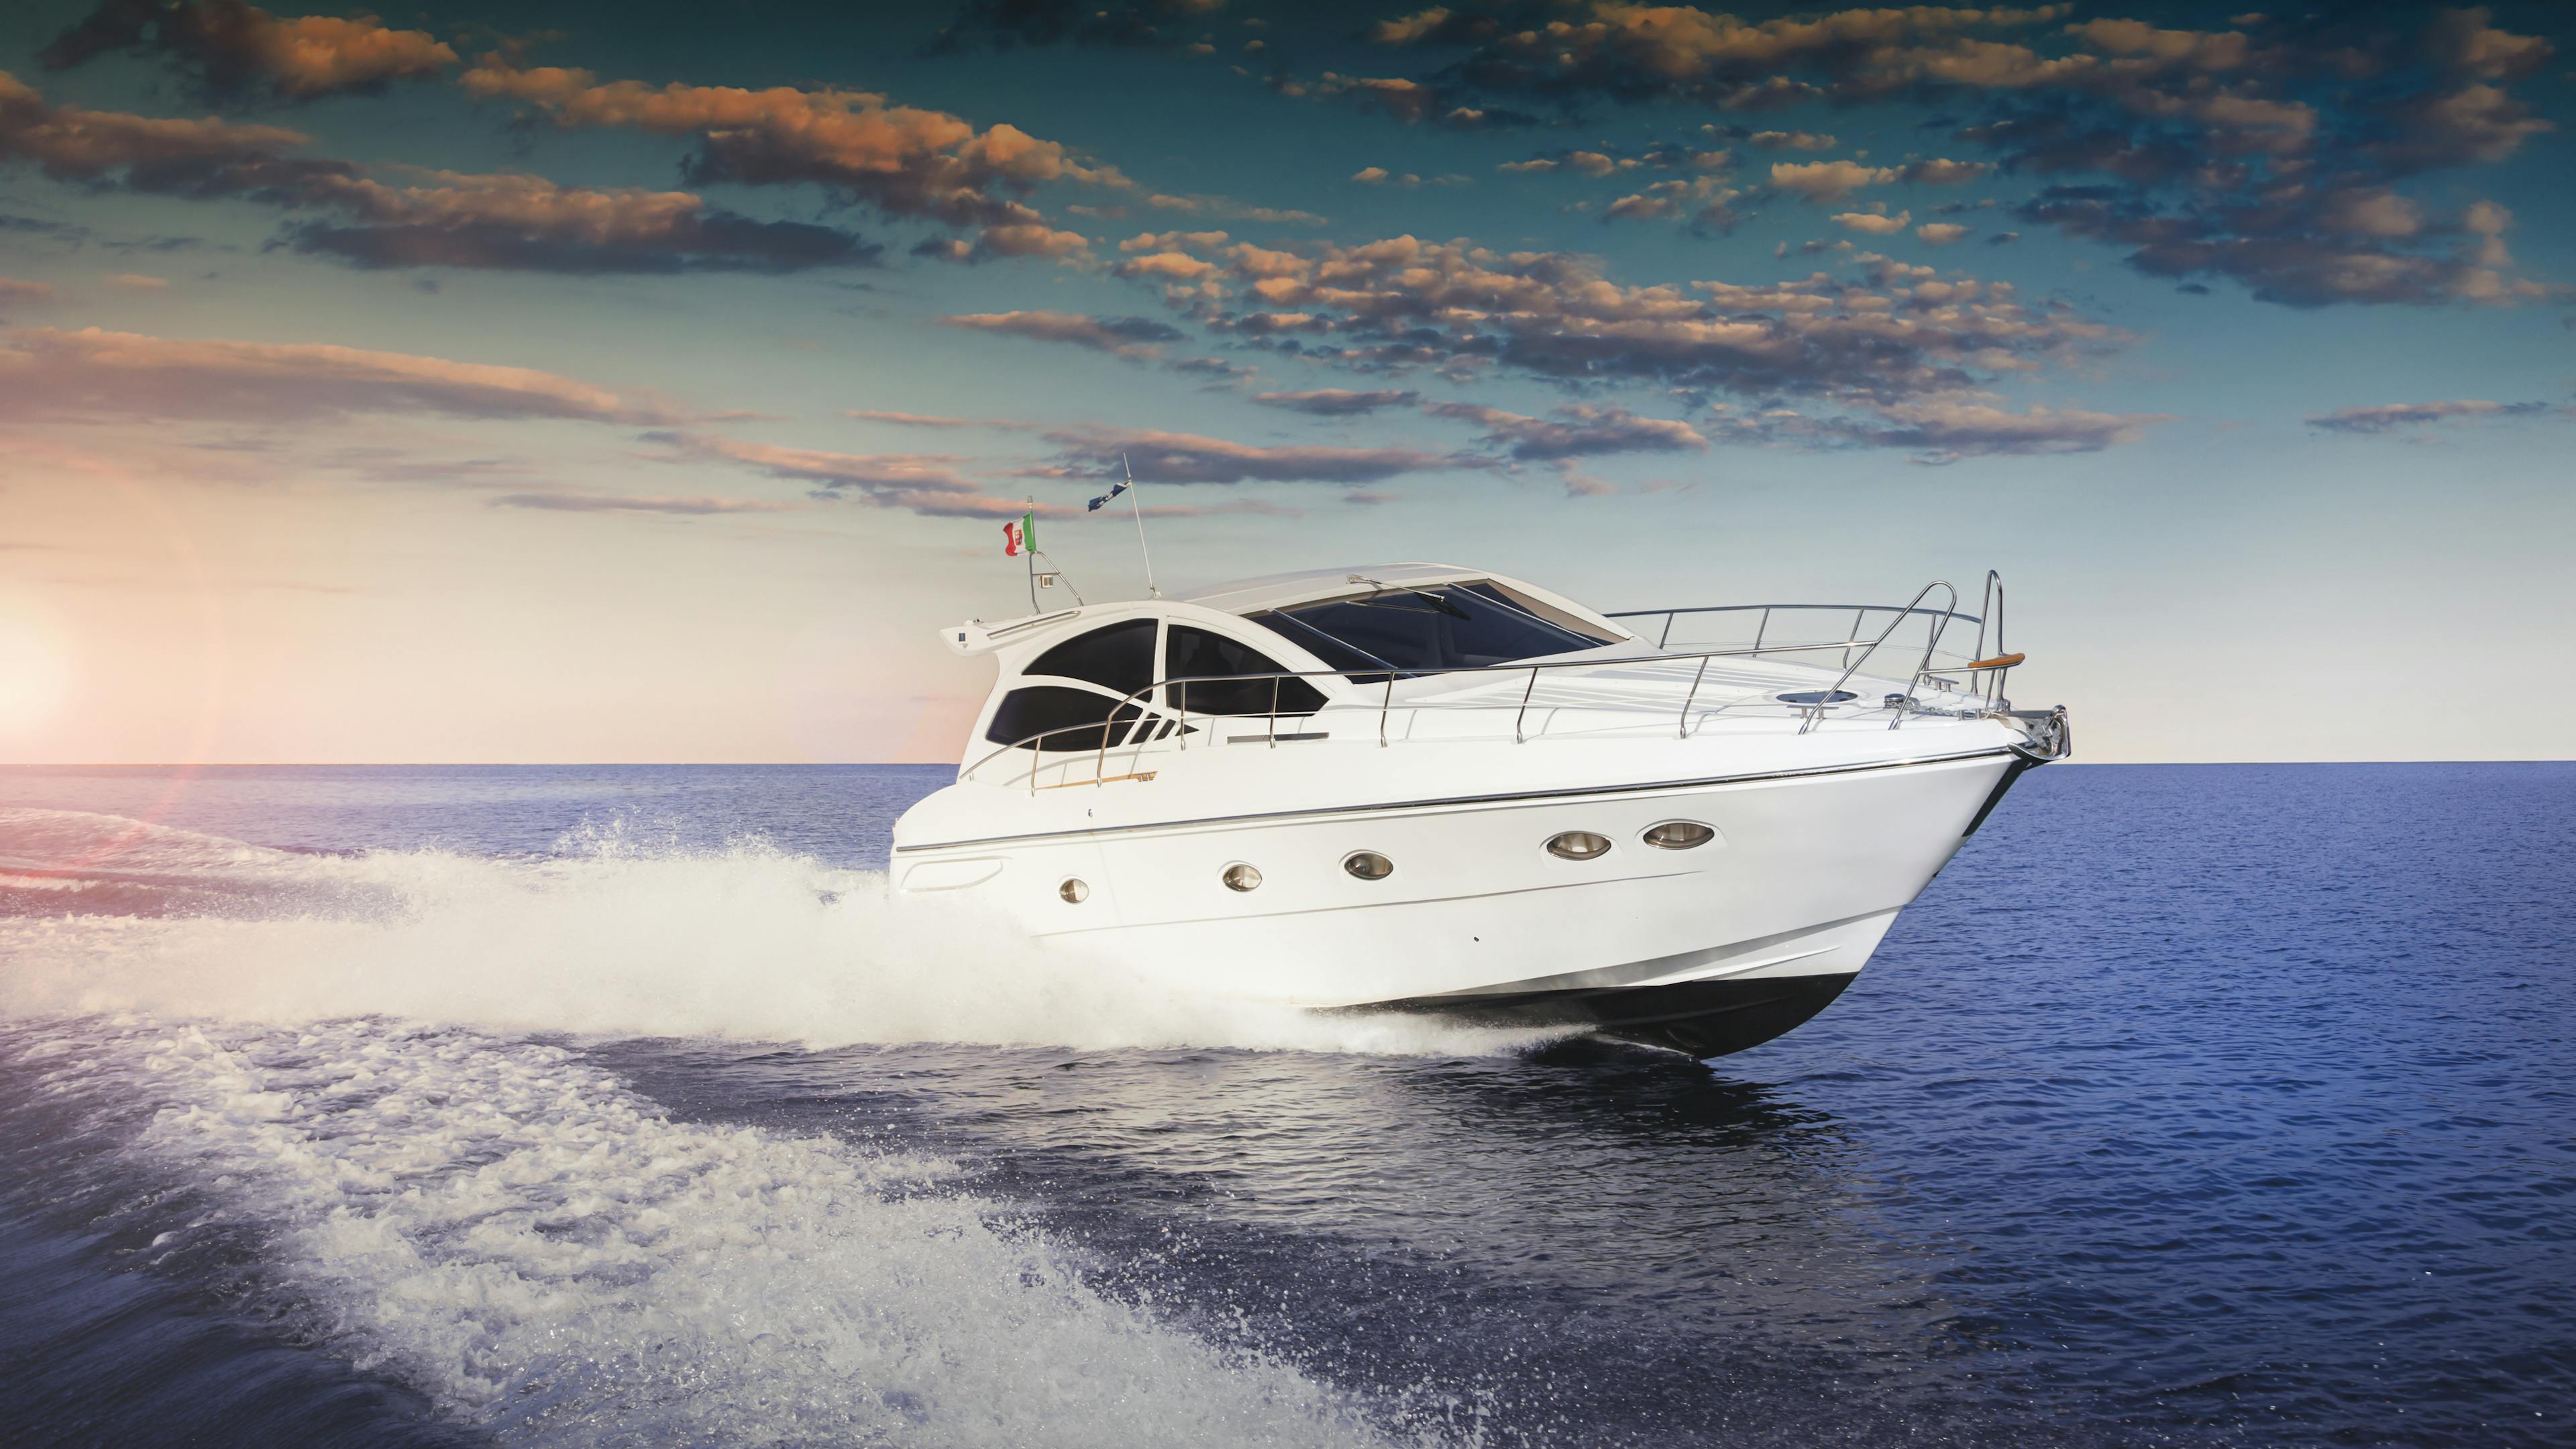 Book a yacht rental today on Boaters List